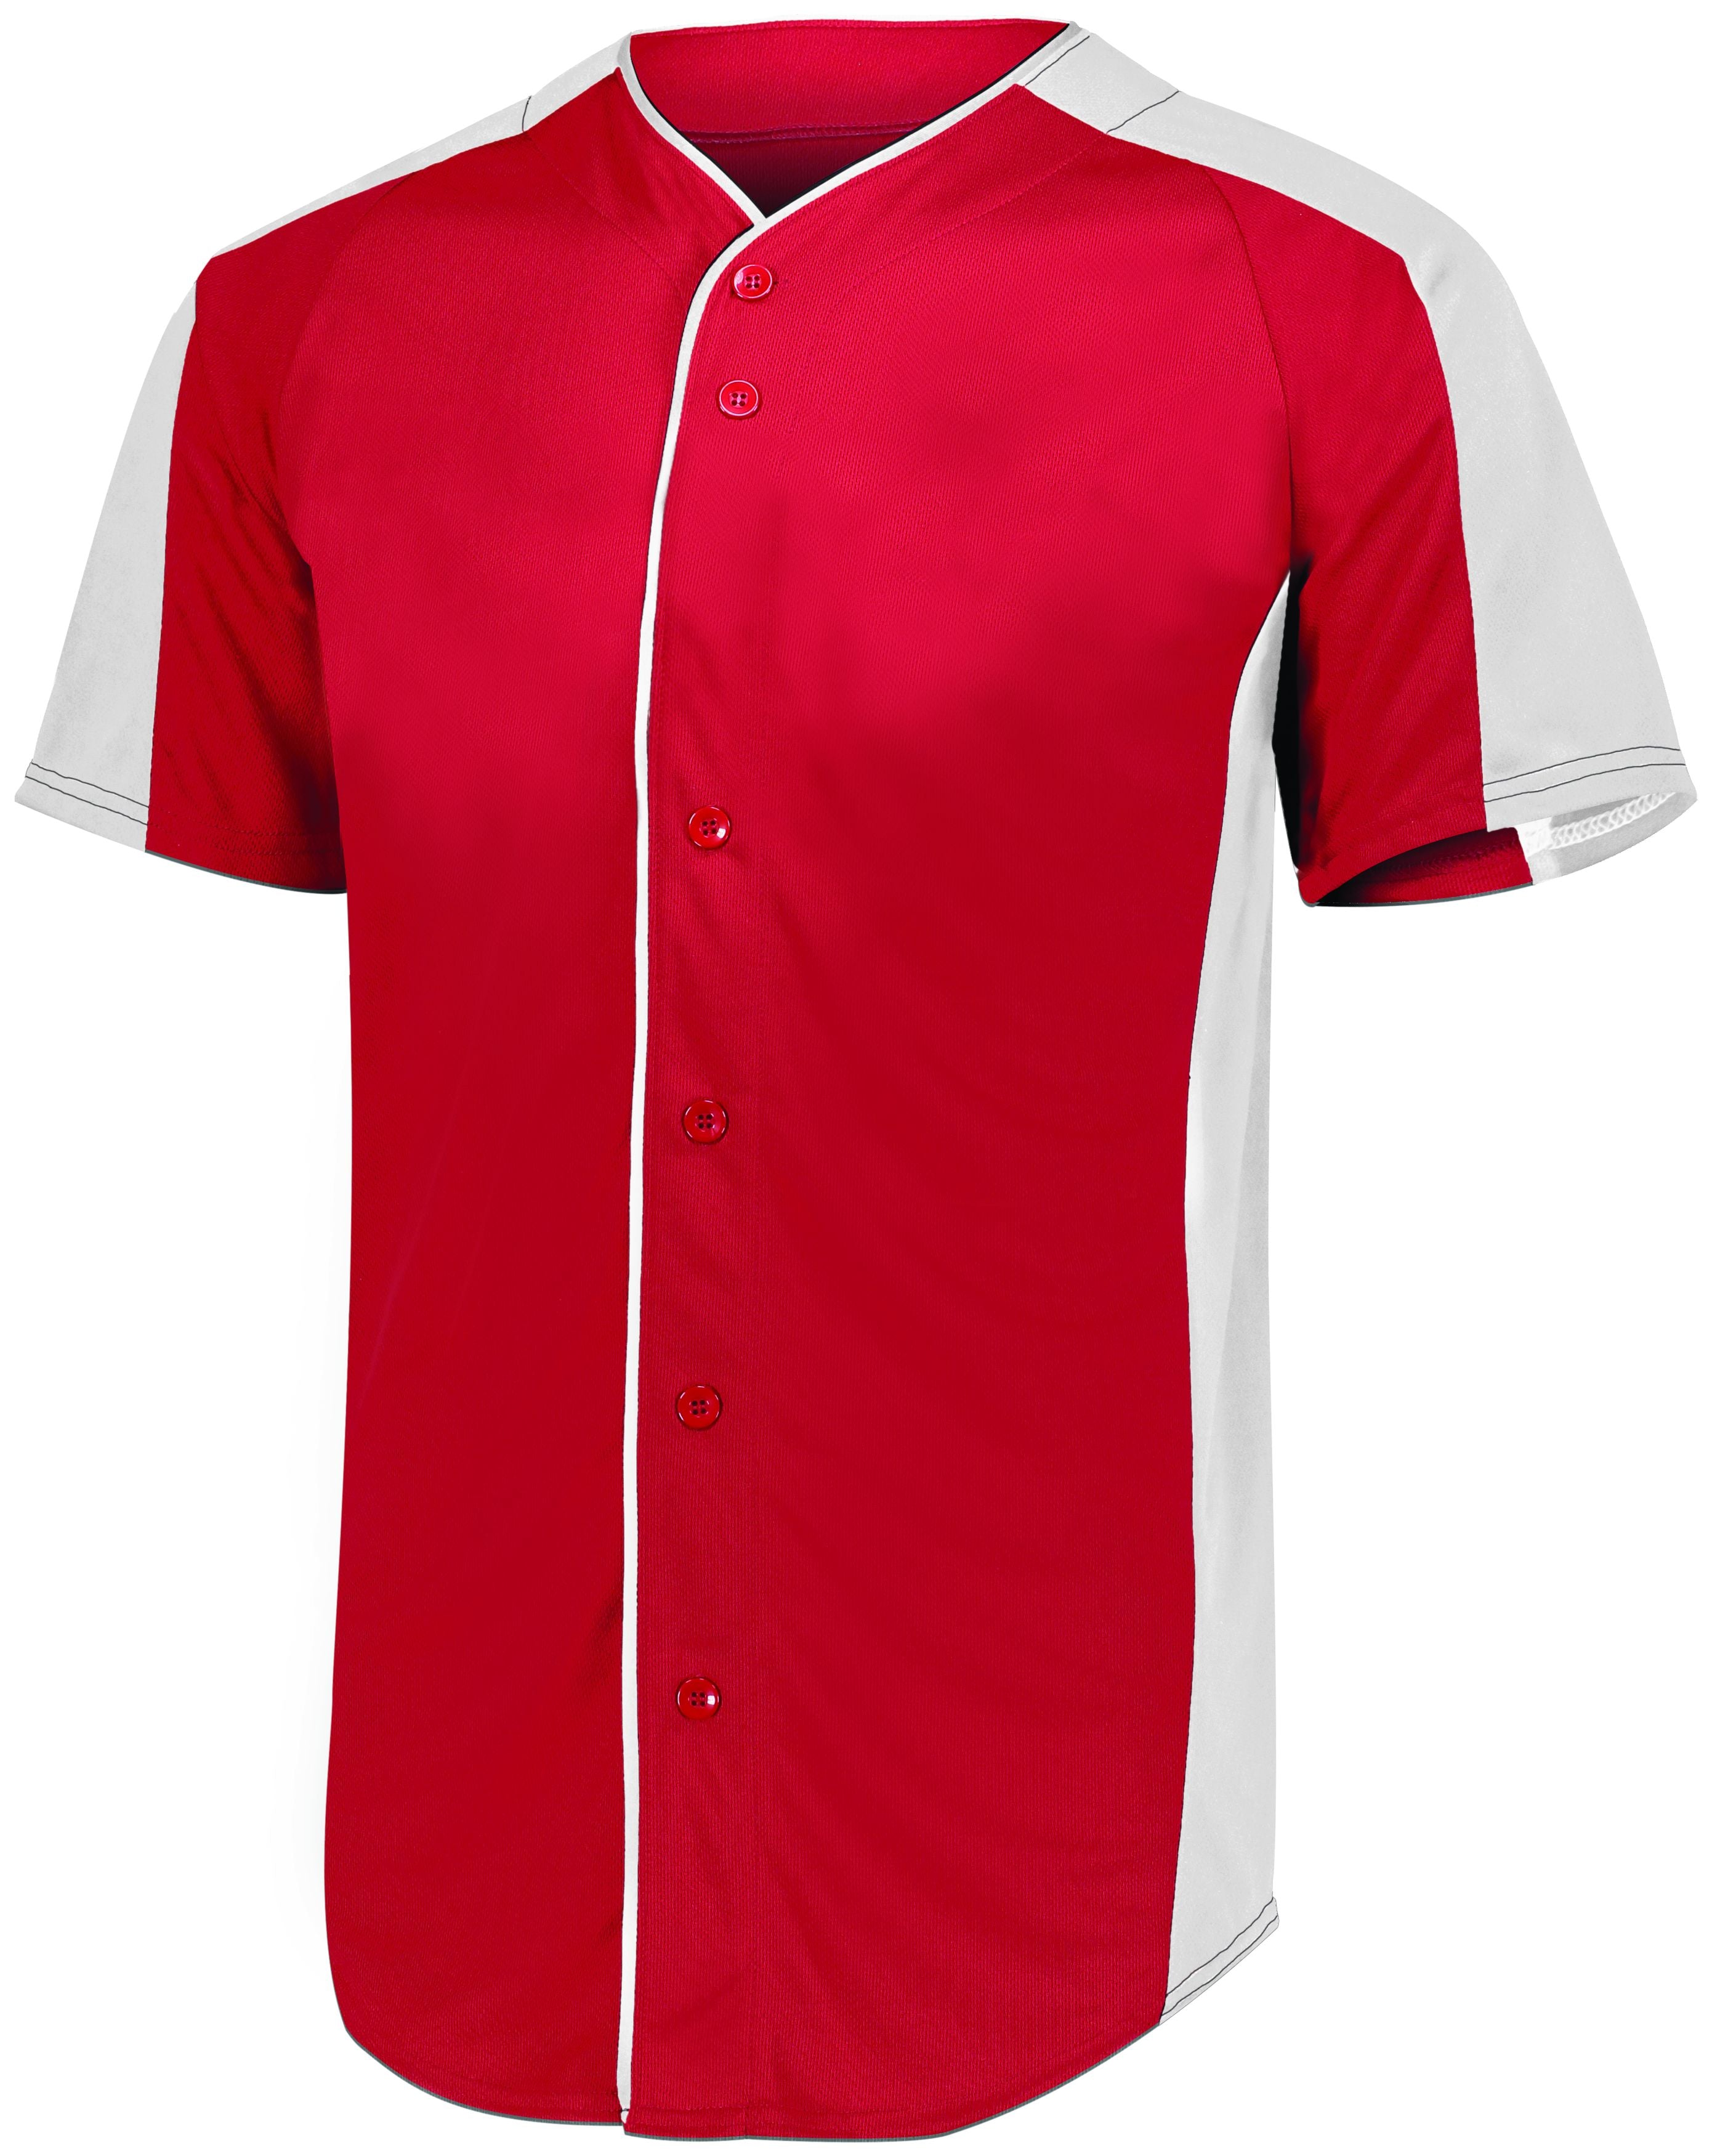 Augusta Sportswear Full-Button Baseball Jersey in Red/White  -Part of the Adult, Adult-Jersey, Augusta-Products, Baseball, Shirts, All-Sports, All-Sports-1 product lines at KanaleyCreations.com